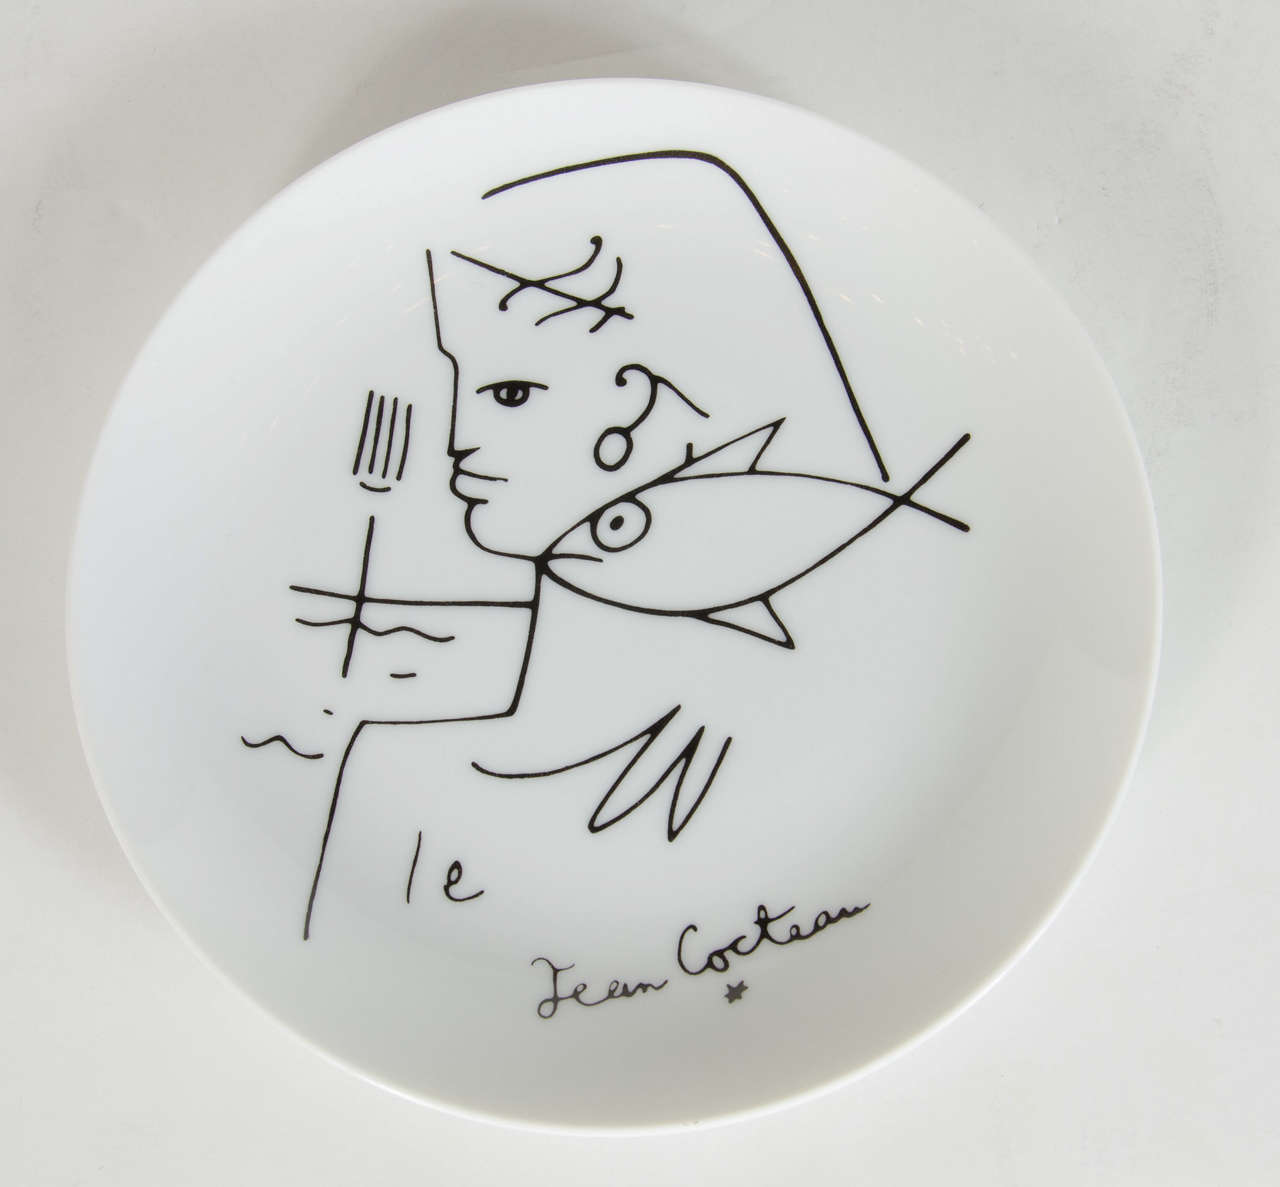 This plate features a stylized Neptune design by Jean Cocteau executed by the limoge company. A really great accessory for any room and it also can be hung on a wall or be on a plate stand as well. greta as wall decor or as an object in a bookcase